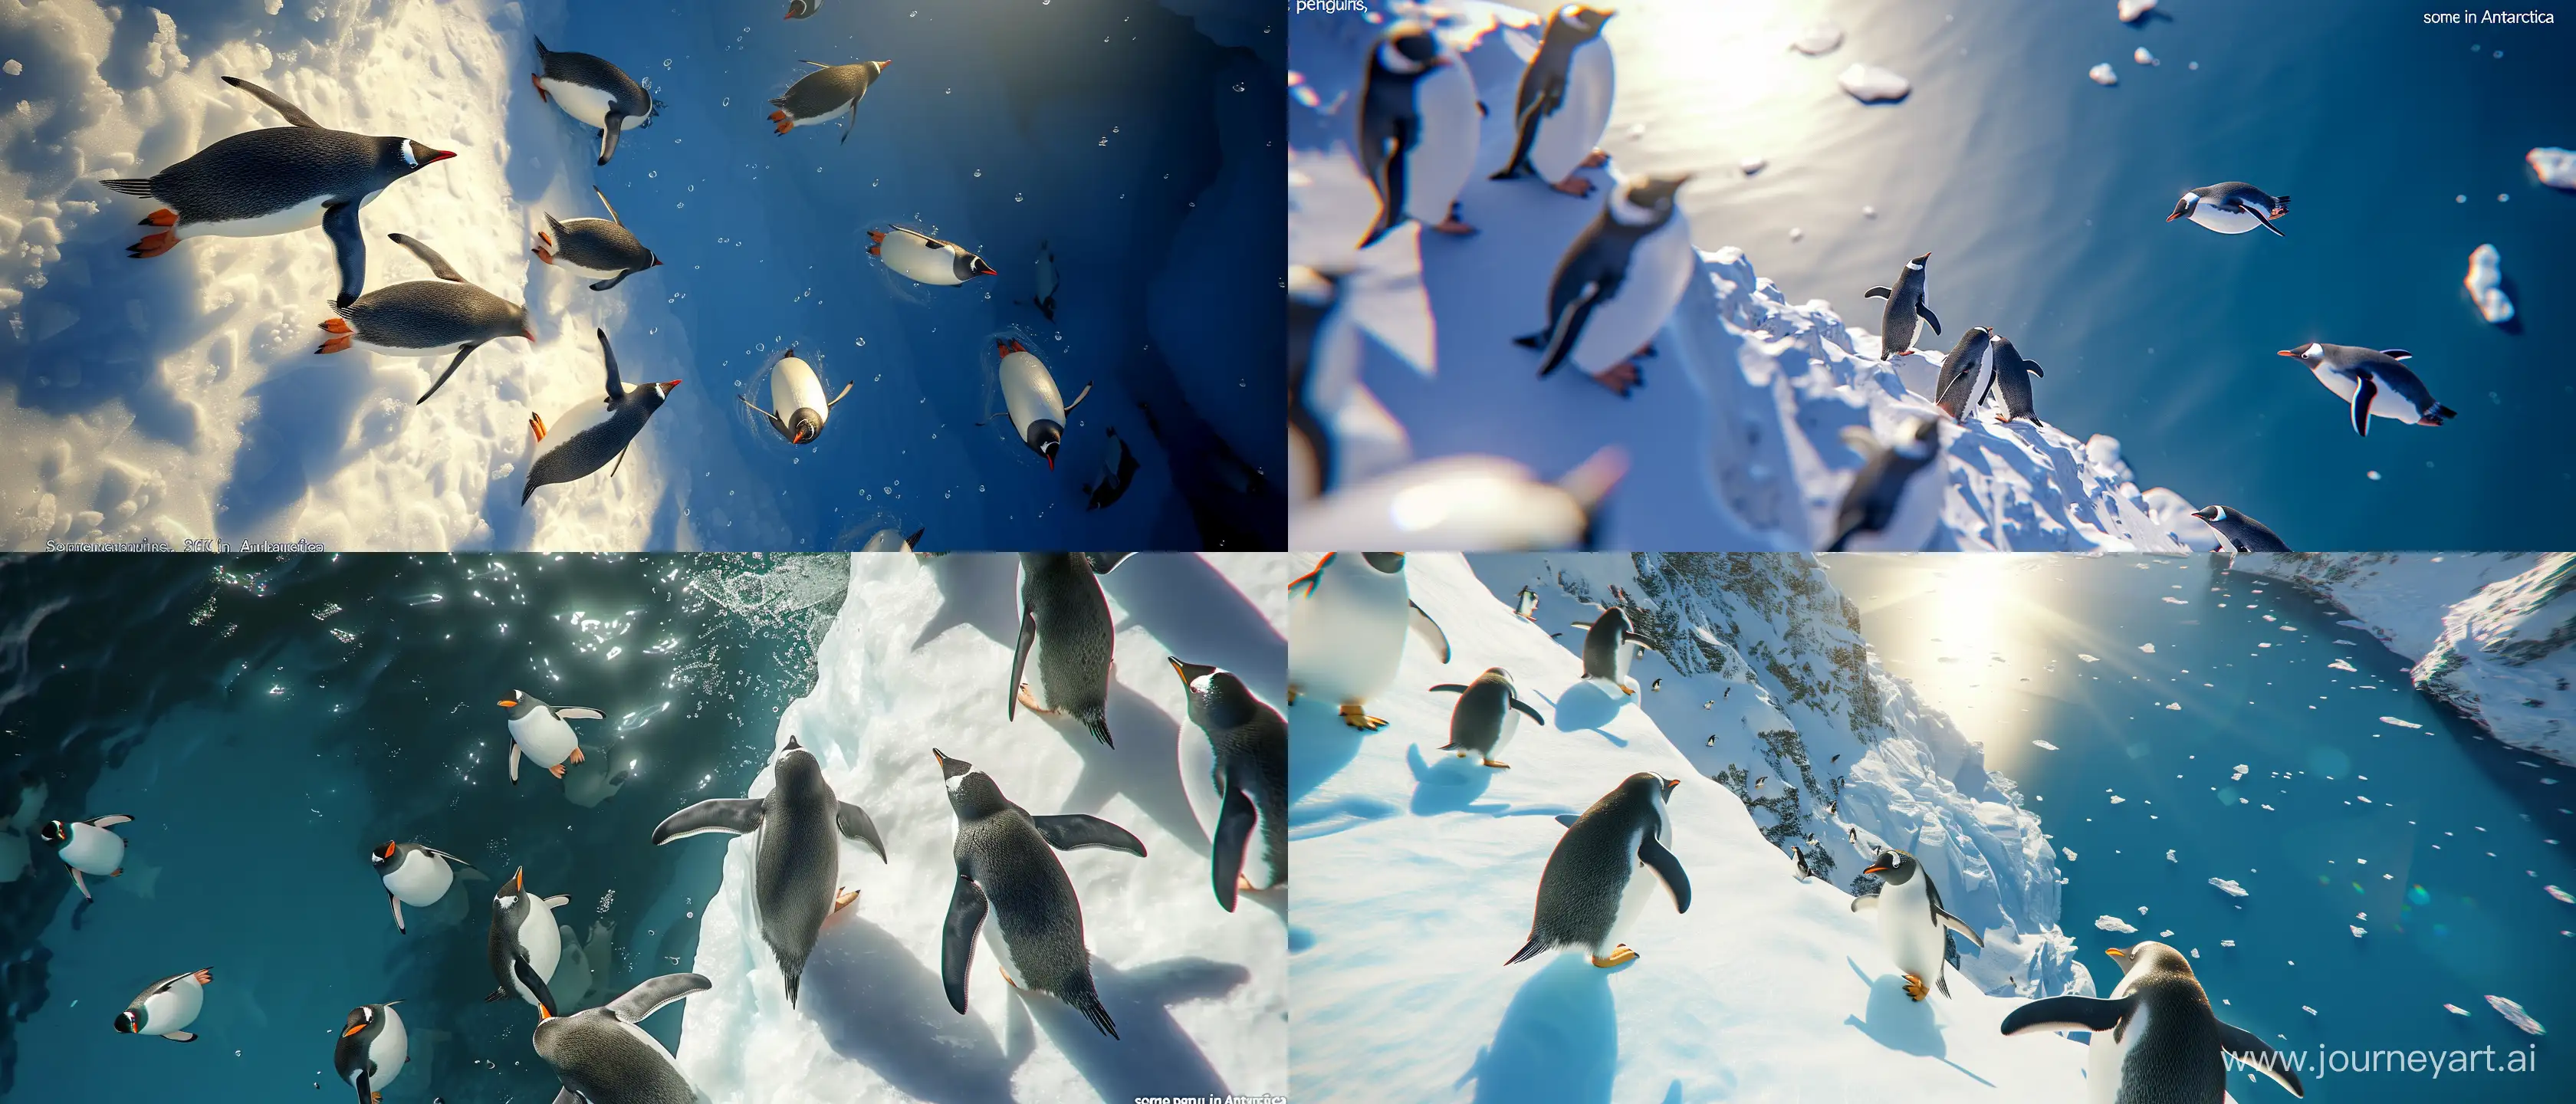 HyperRealistic-32k-Aerial-View-of-Penguins-in-Antarctica-on-a-Sunny-Day